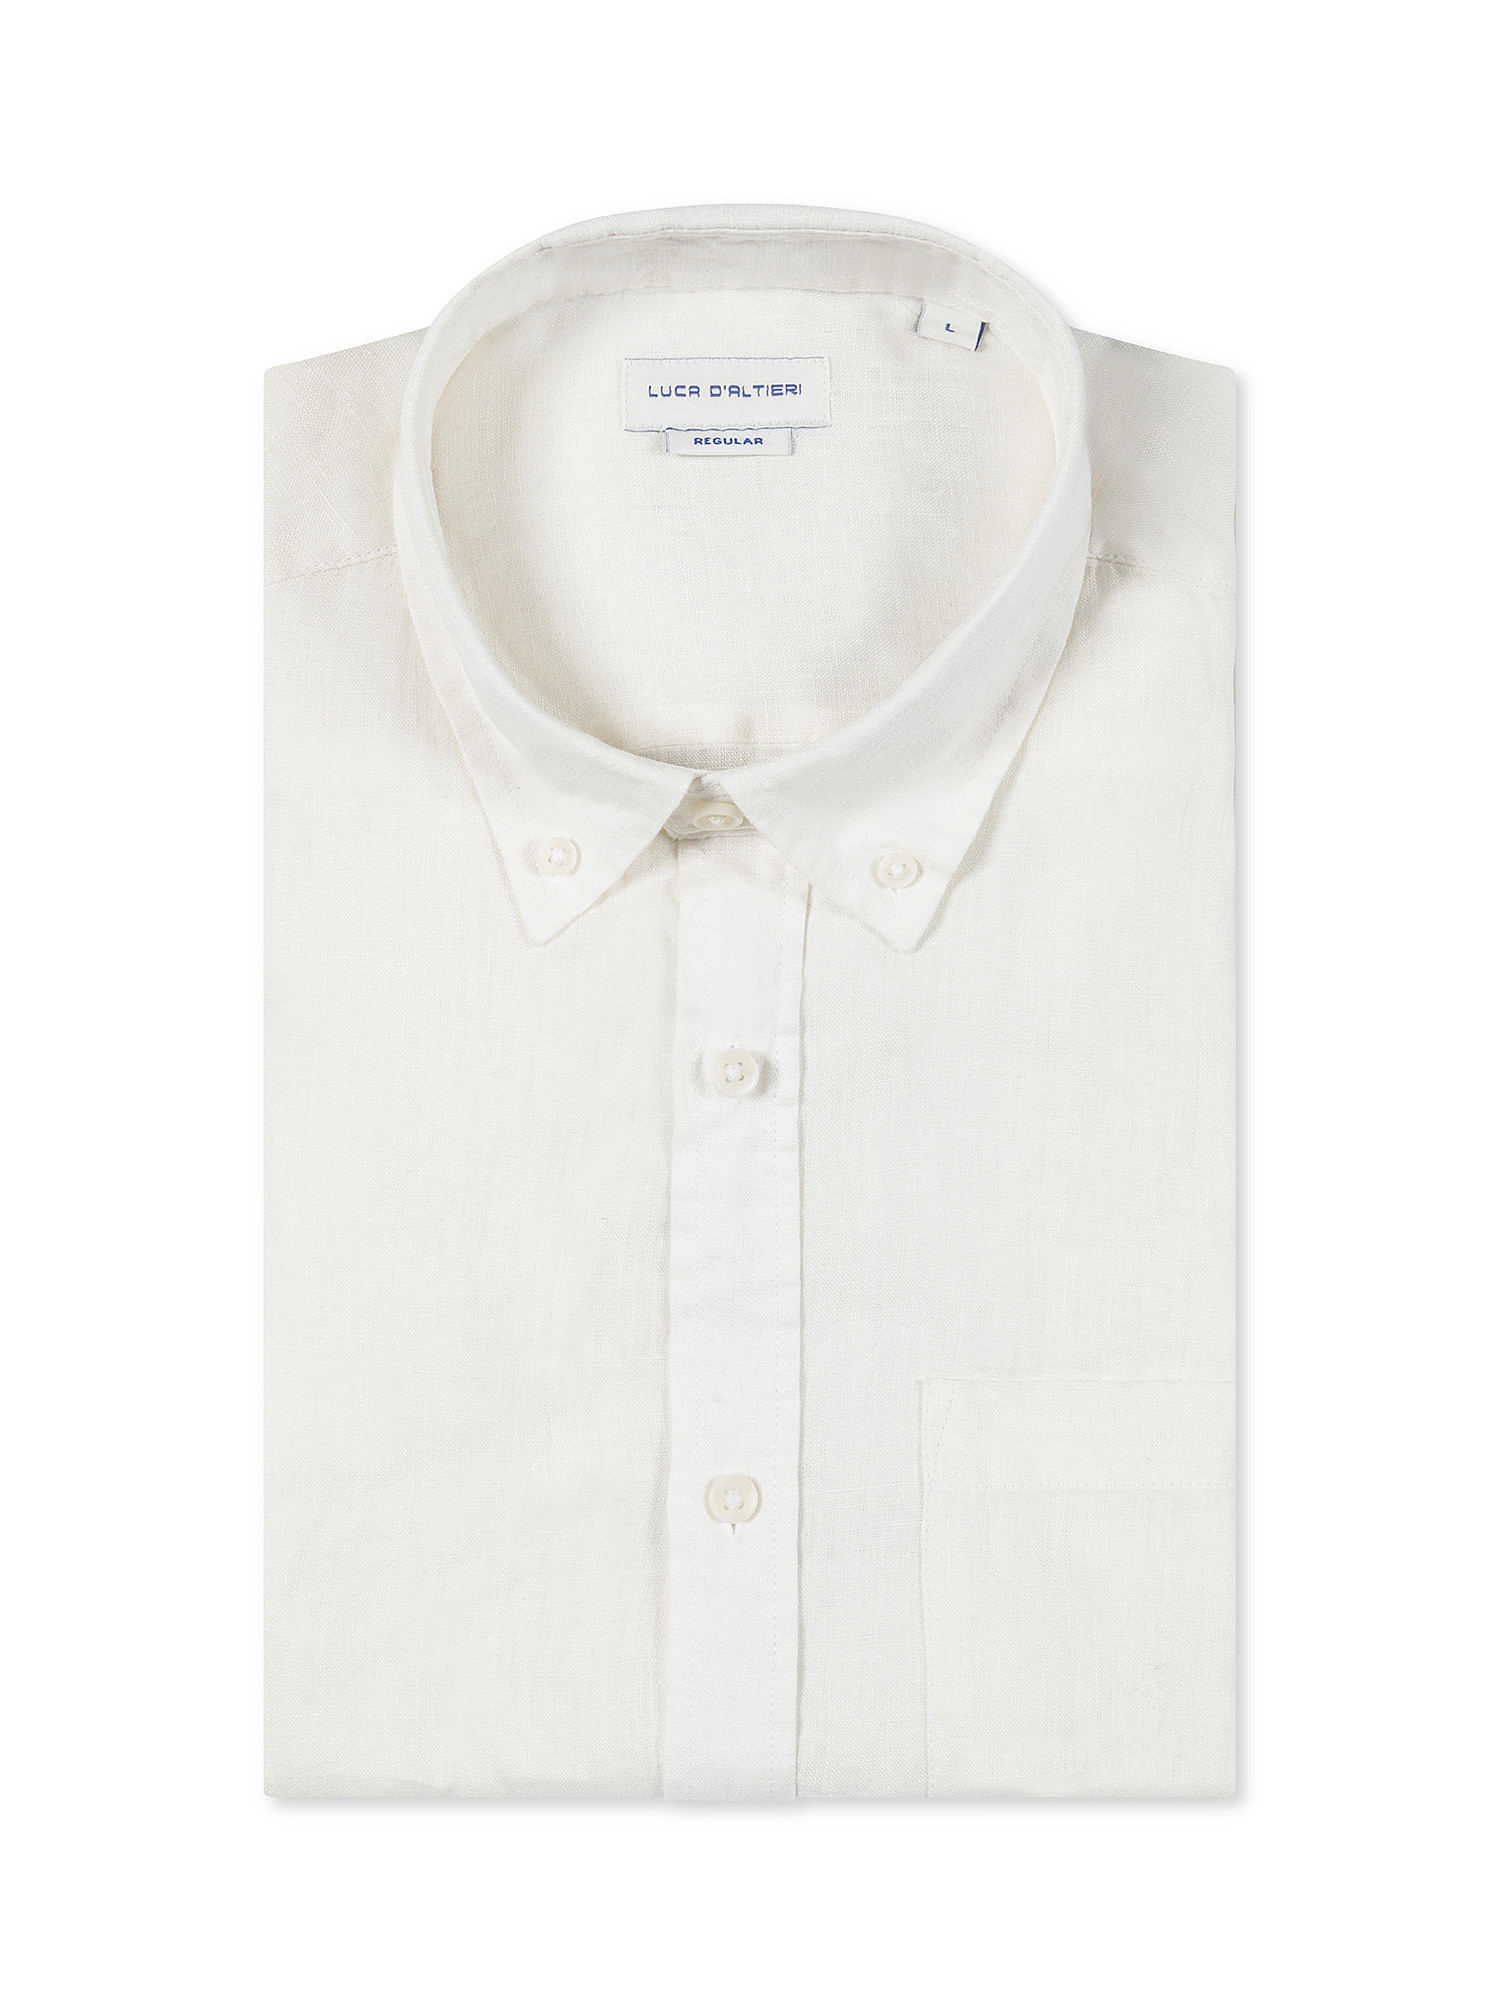 Luca D'Altieri - Regular fit shirt in pure linen, White, large image number 2